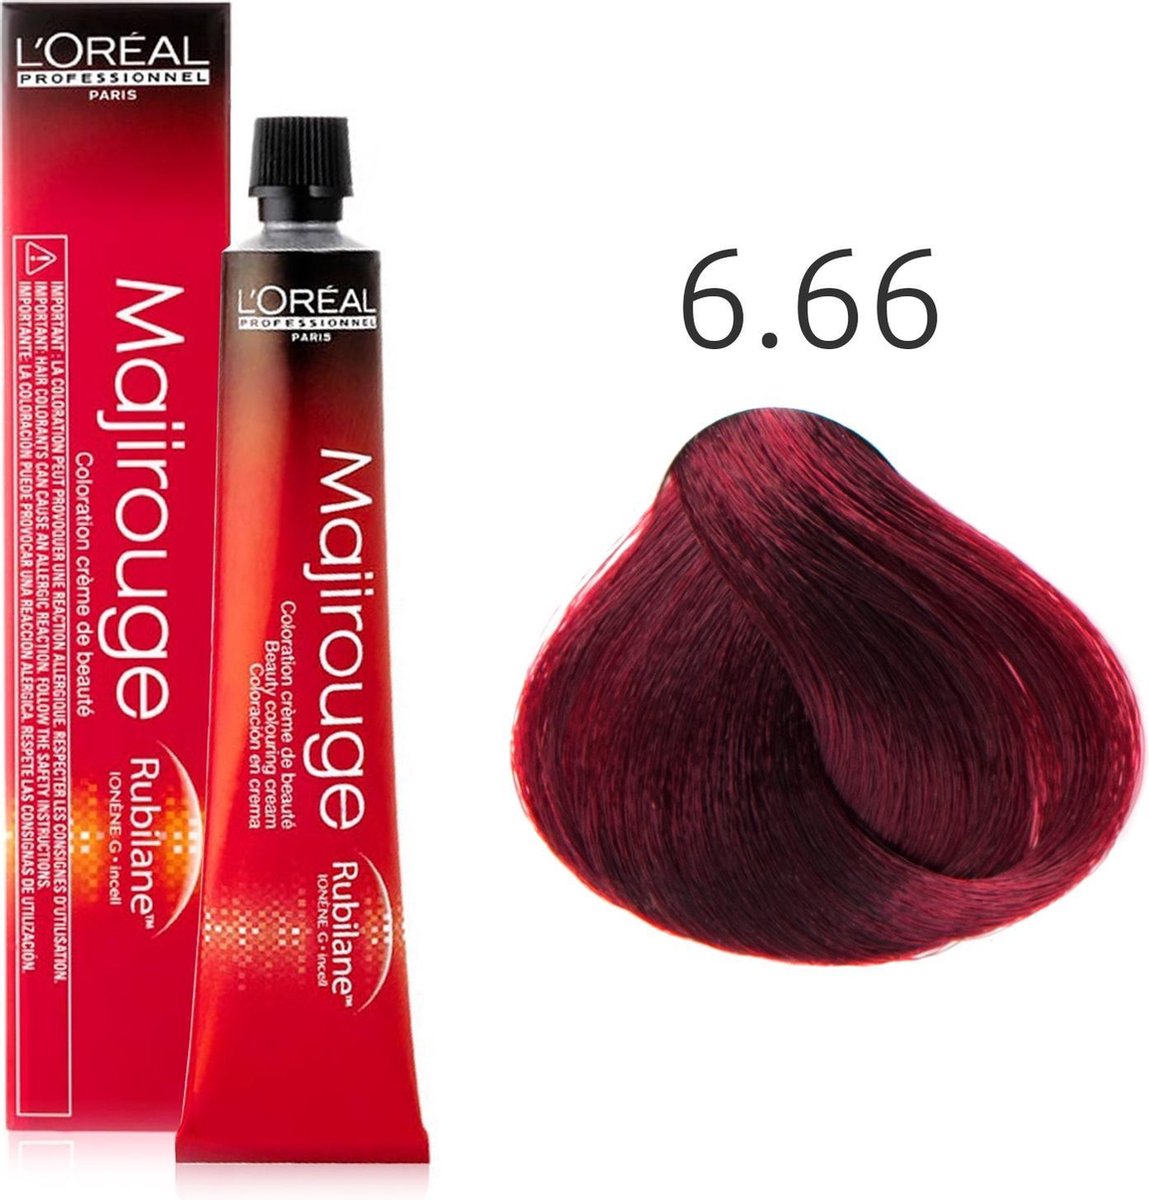 L'Oreal - Majirouge 6.66 - Diep Donker Roodblond - 50ml | bol.com